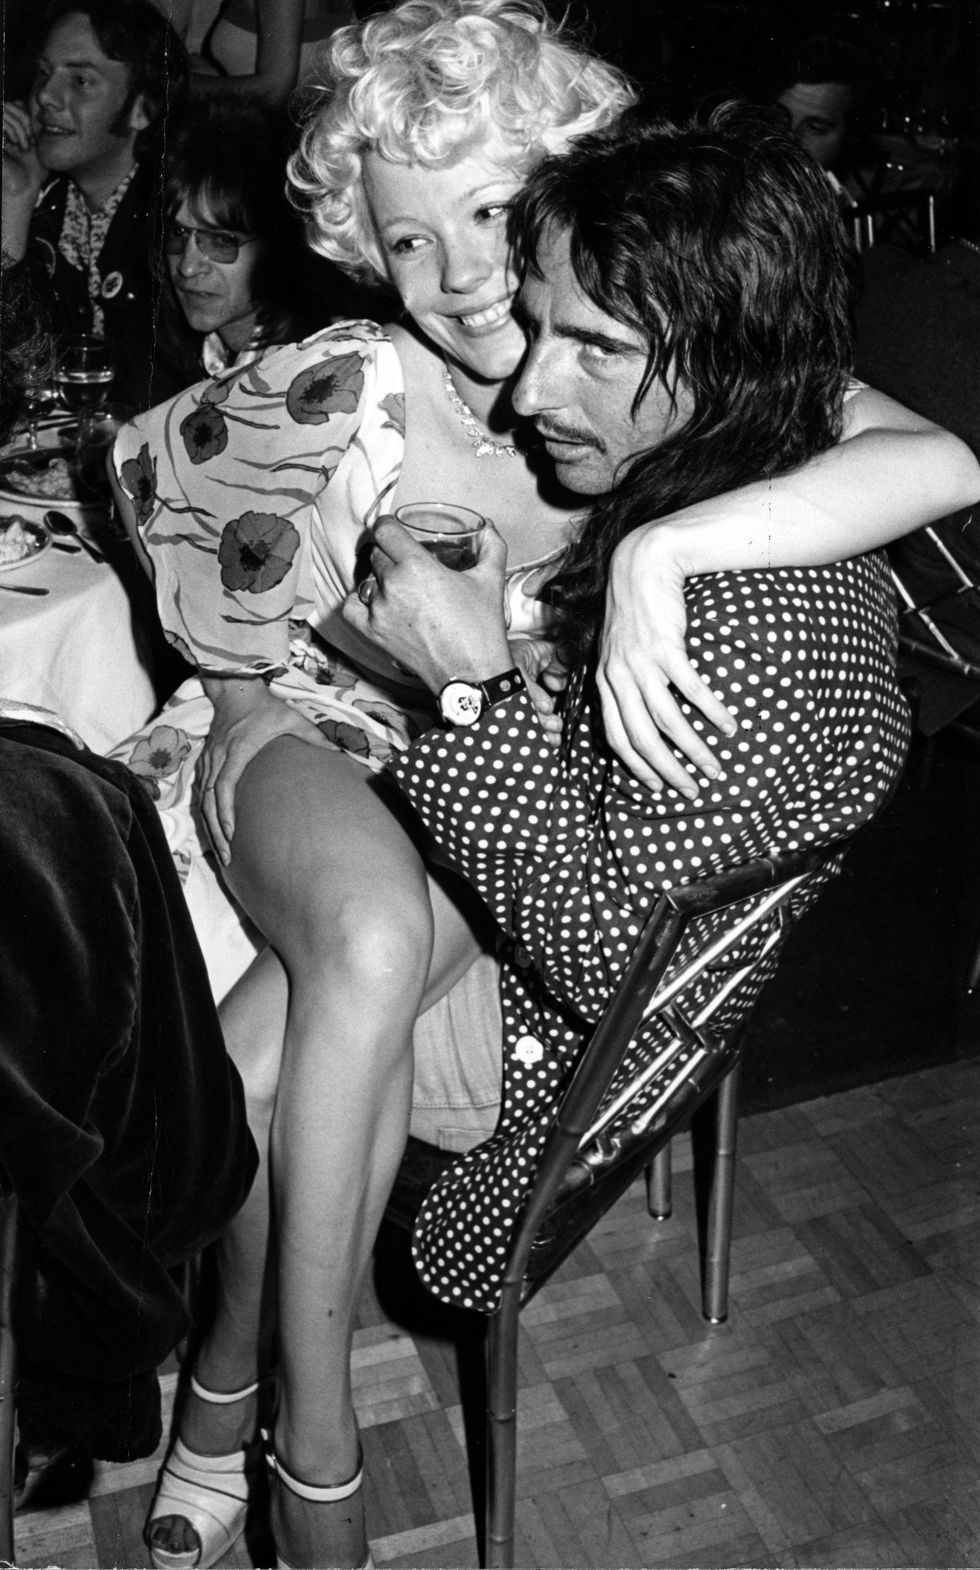 unspecified   january 01  alice cooper with pamela des barres and rodney bingenheimer in the background  photo by michael ochs archivesgetty images